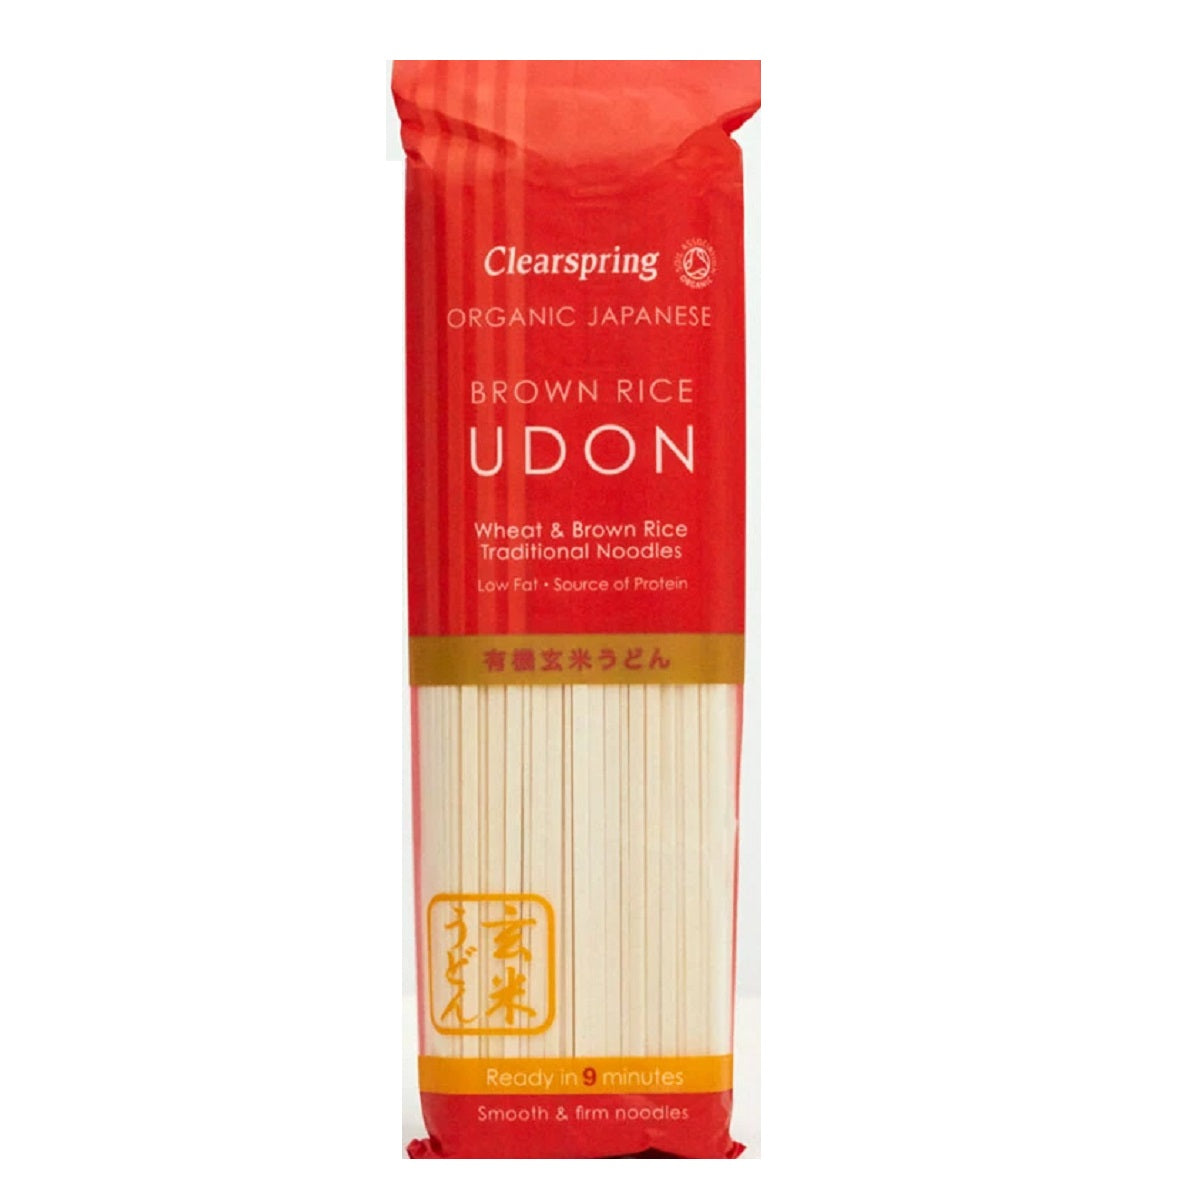 Clearspring Organic Japanese Brown Rice Udon 200g